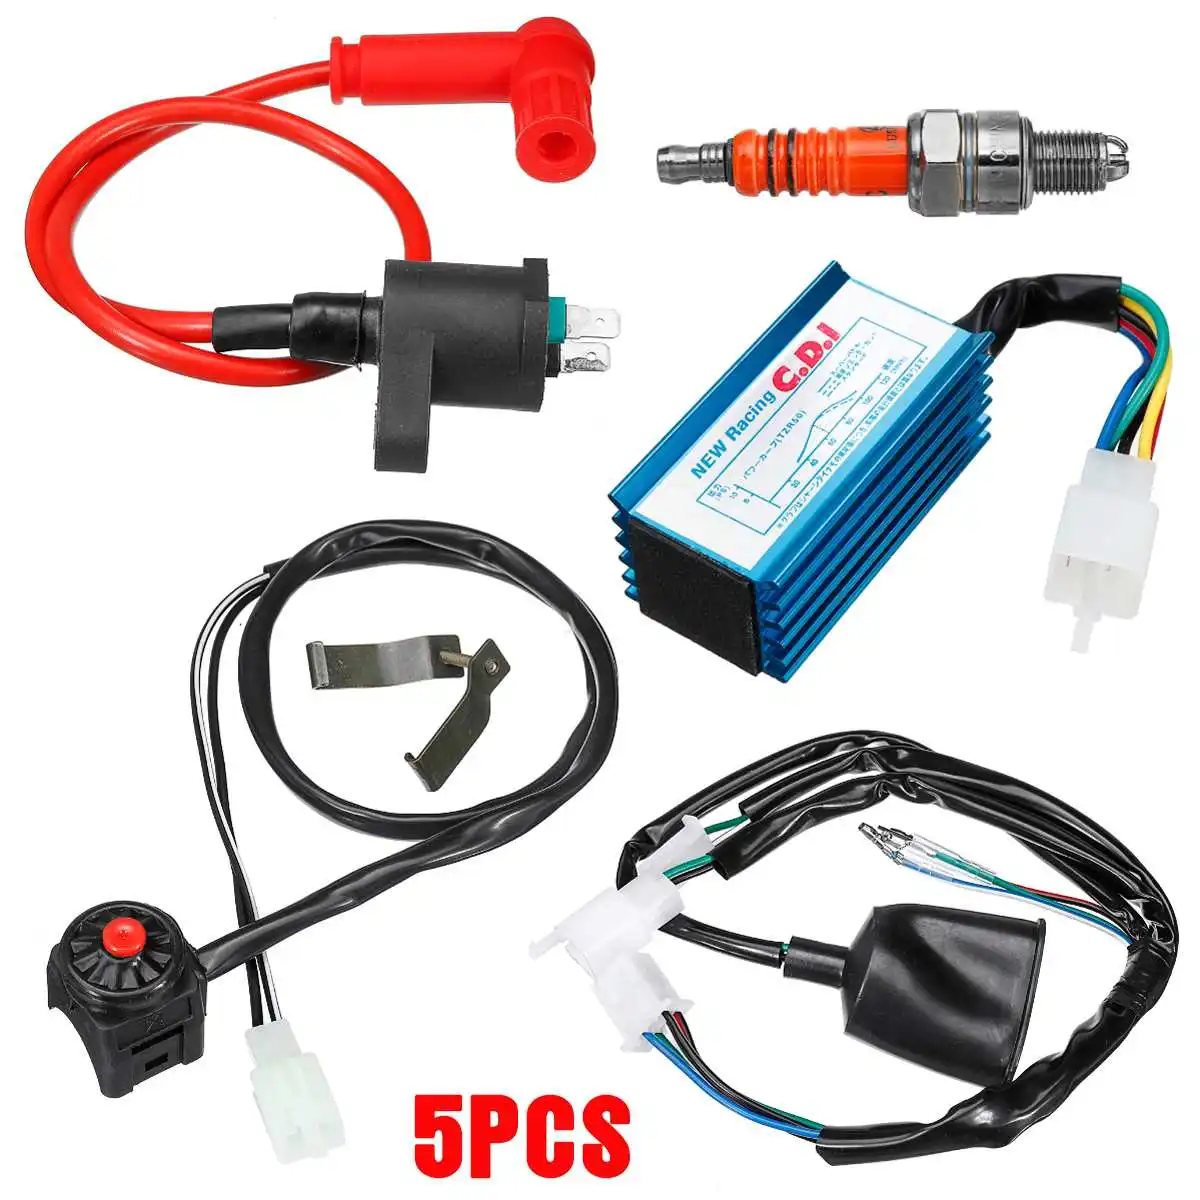 Motorcycle CDI Ignition Coil Wiring Harness Starter Switch Sparks Plug Kit For 50cc 110cc 125cc 140cc Scooter ATV Quad